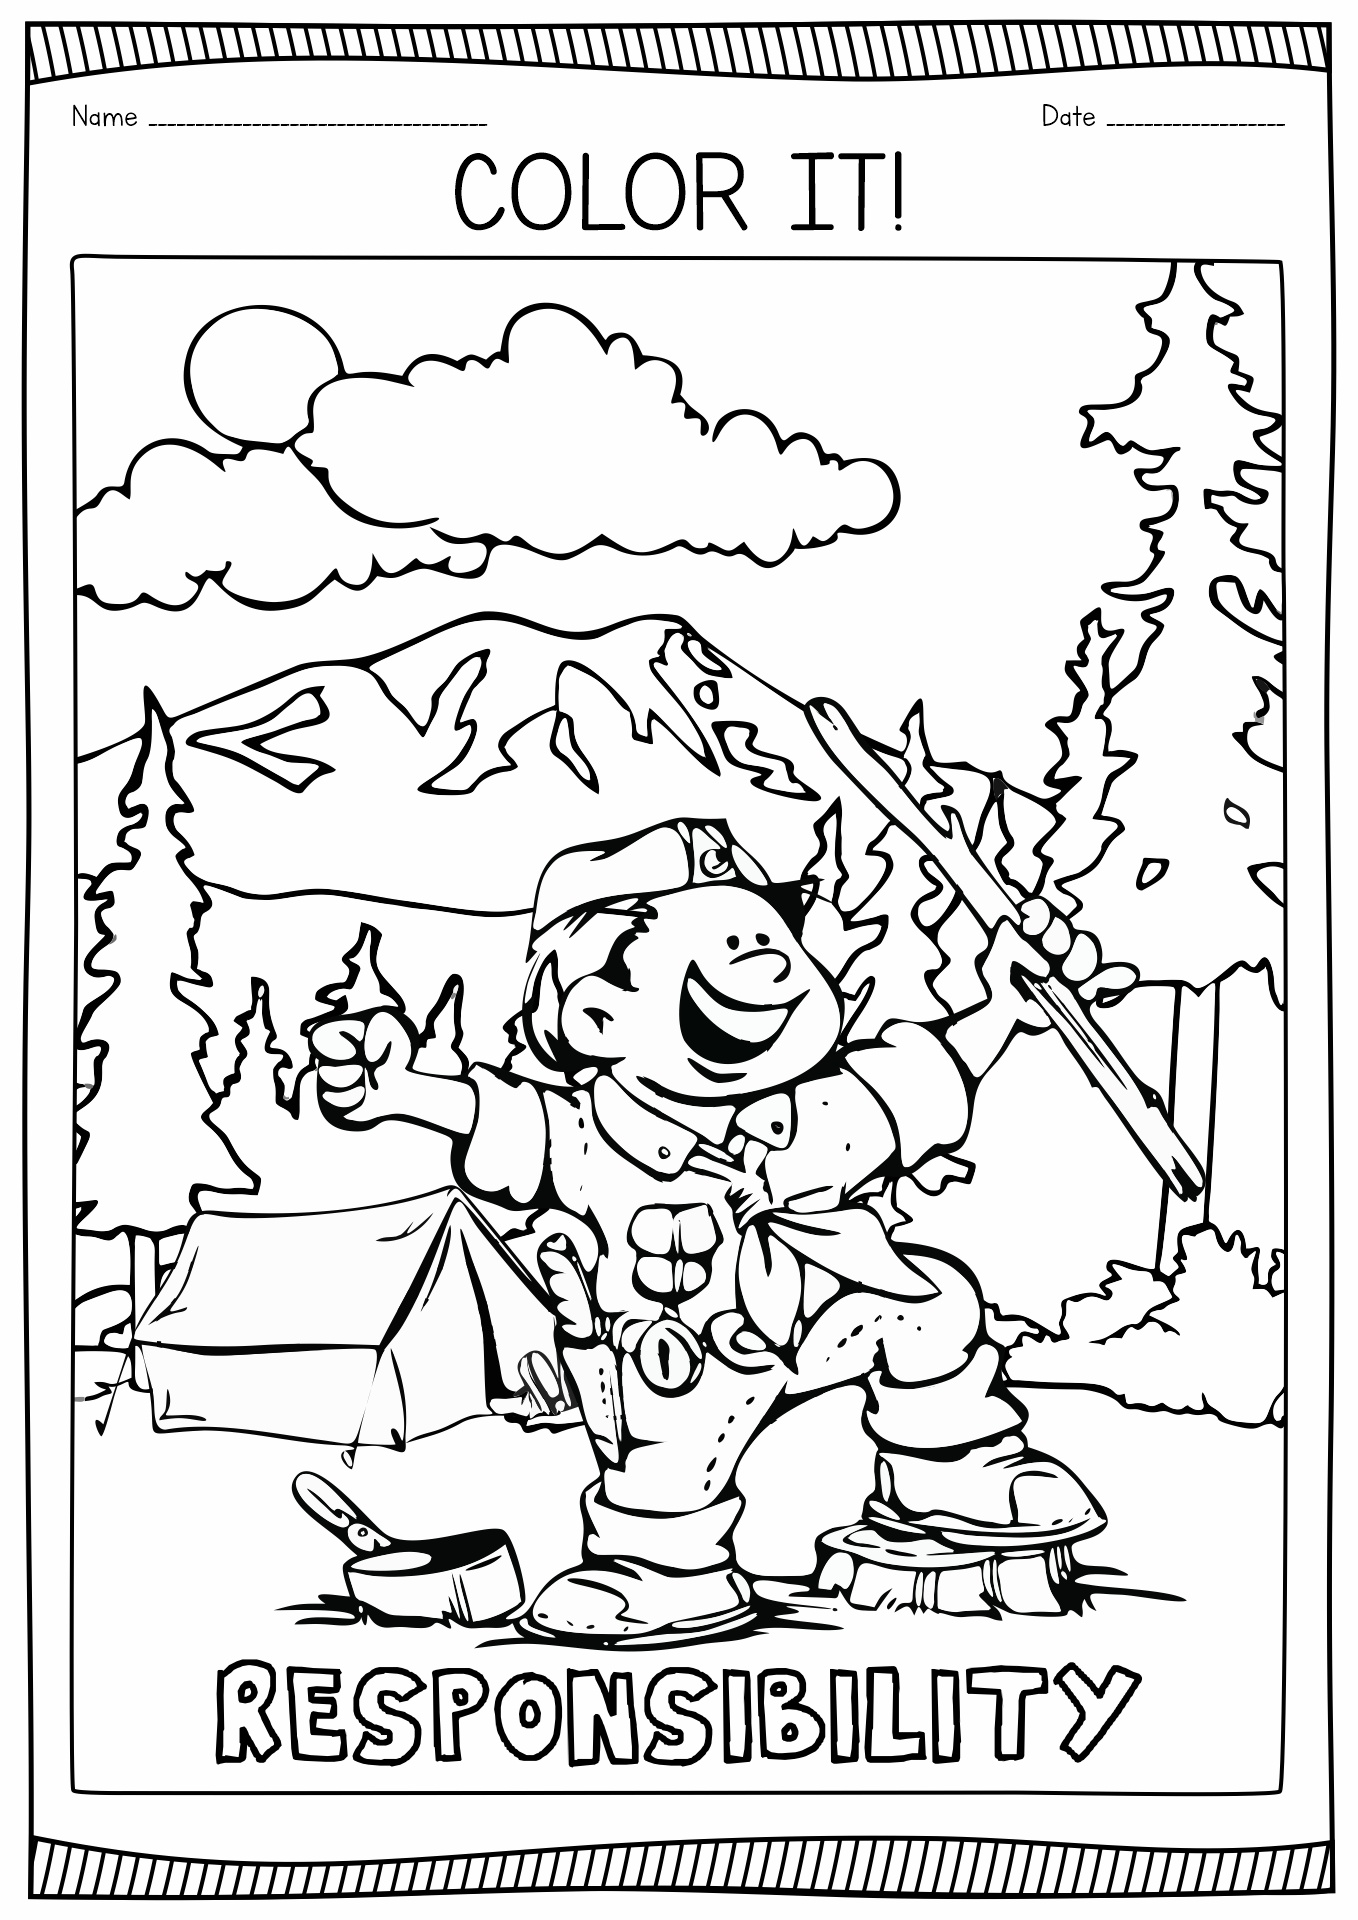 Cub Scout Responsibility Coloring Page Image